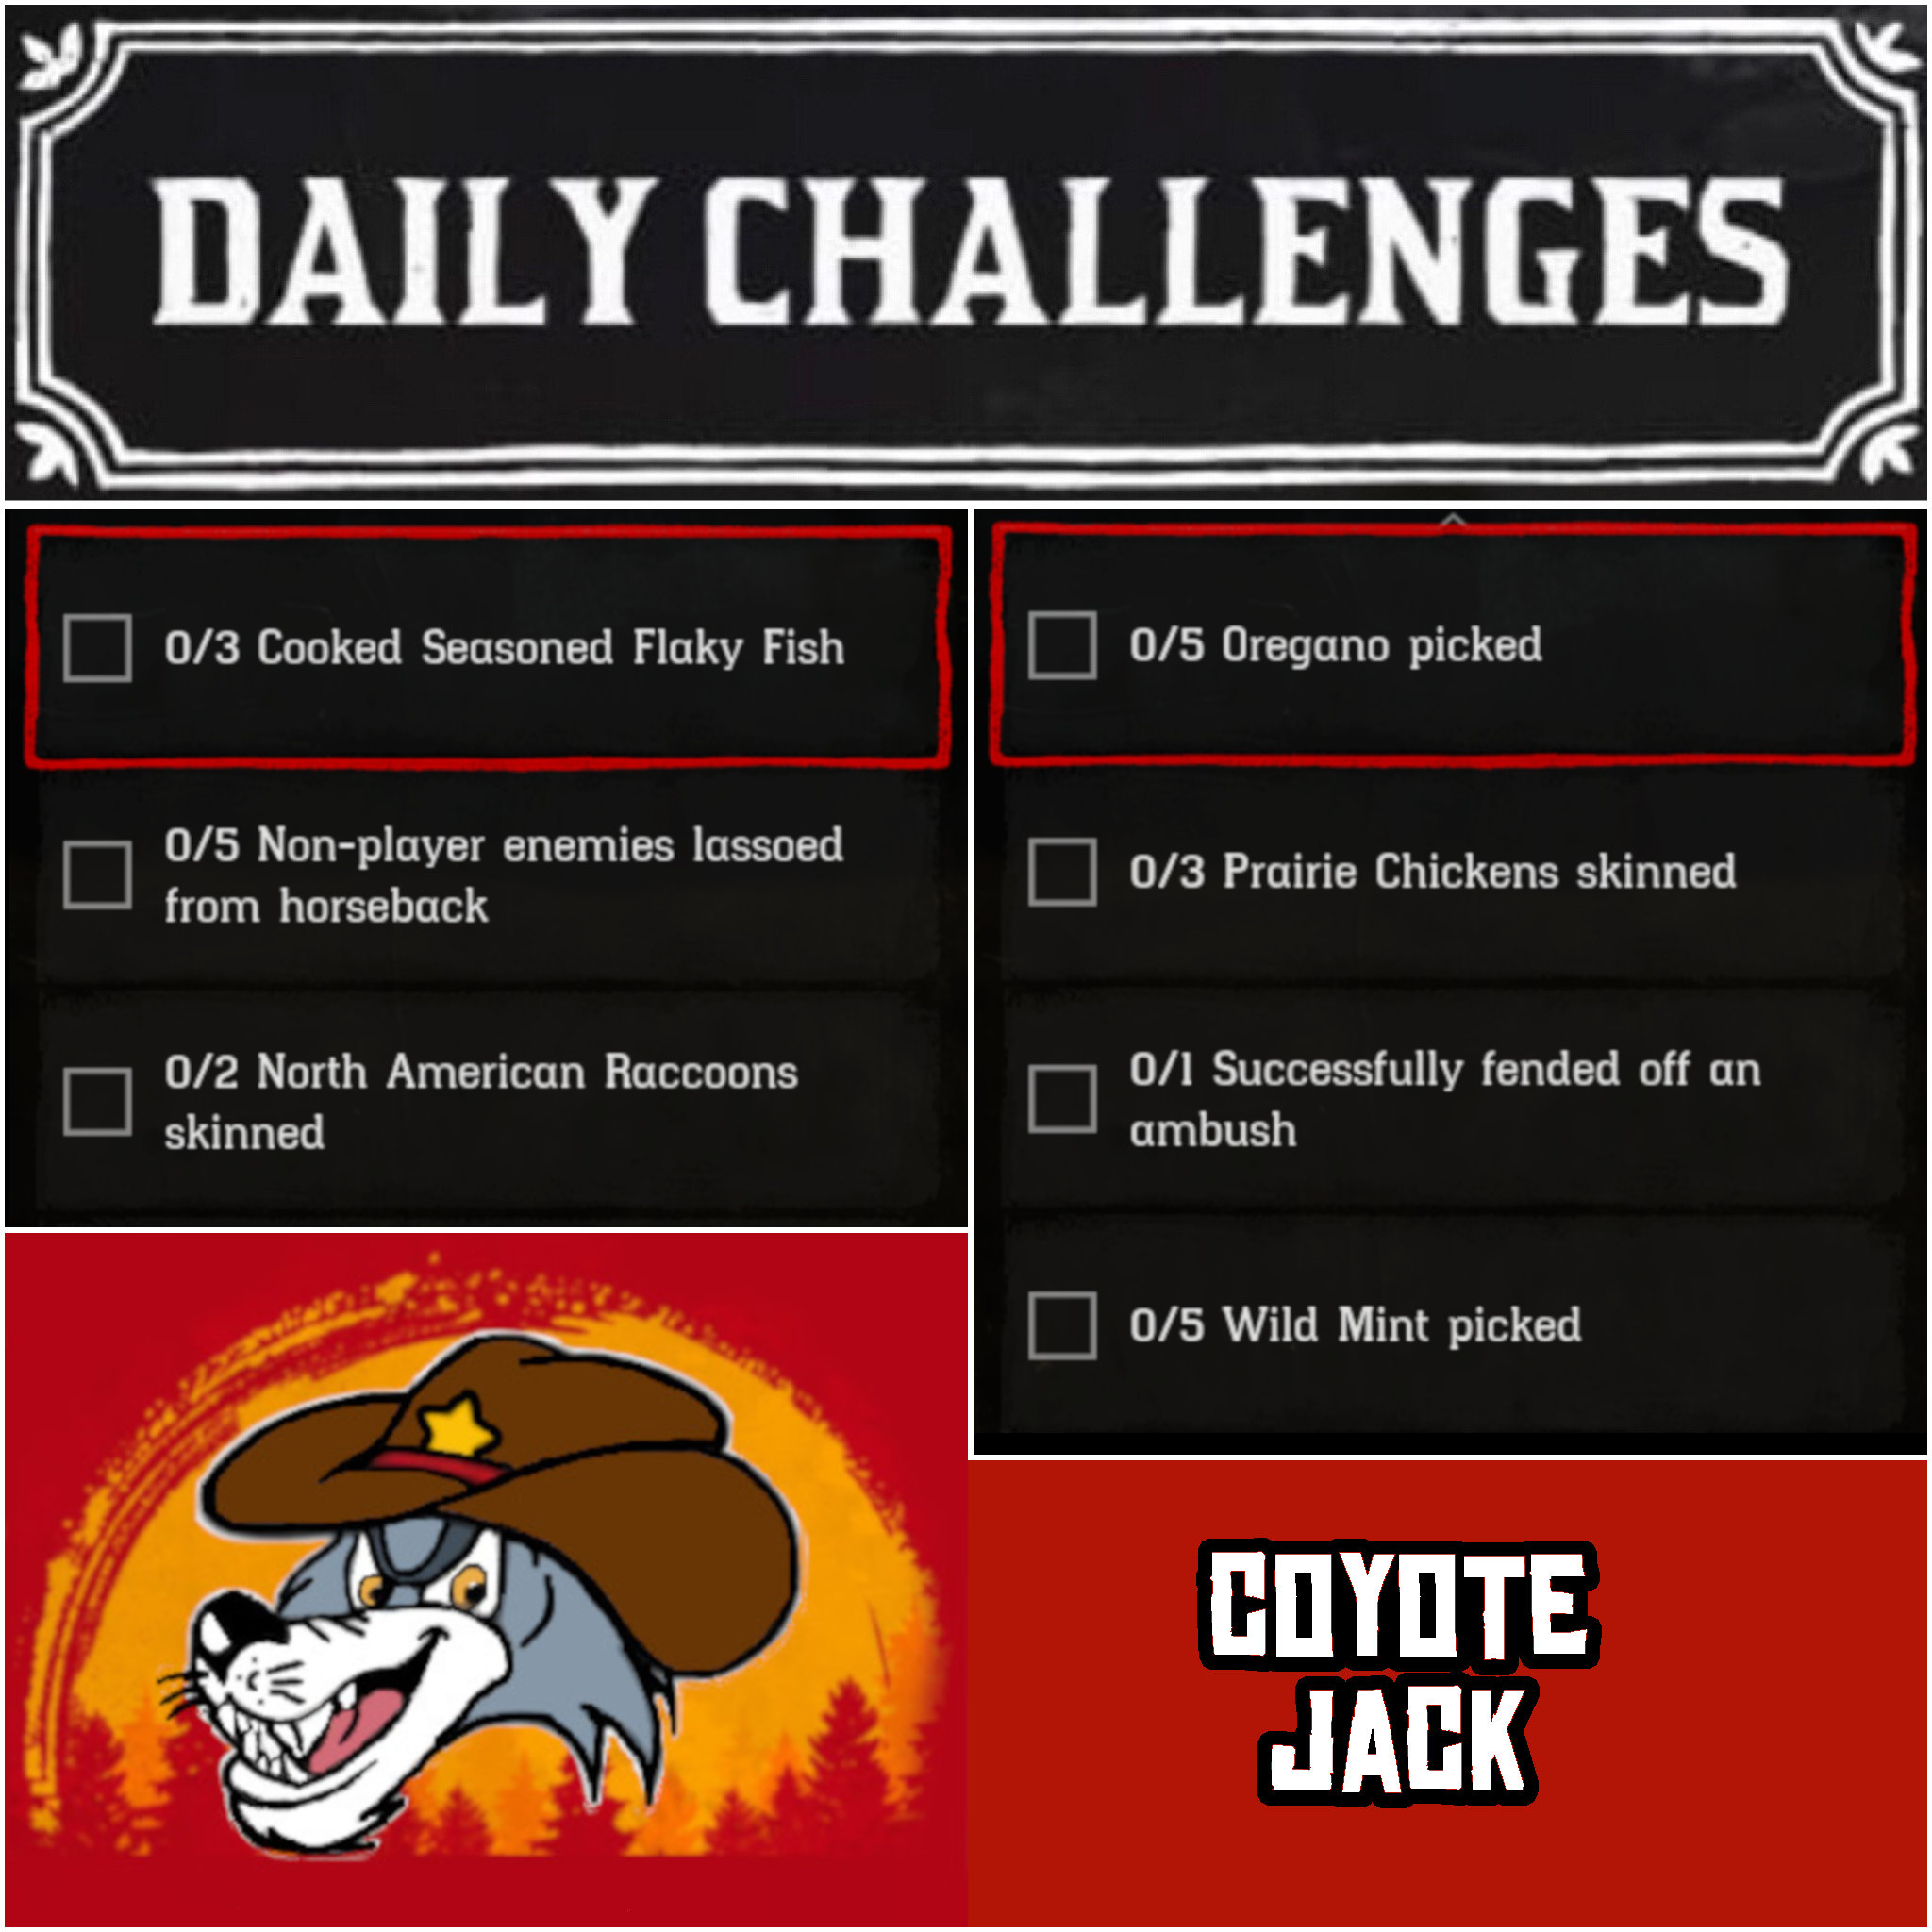 You are currently viewing Wednesday 11 November Daily Challenges